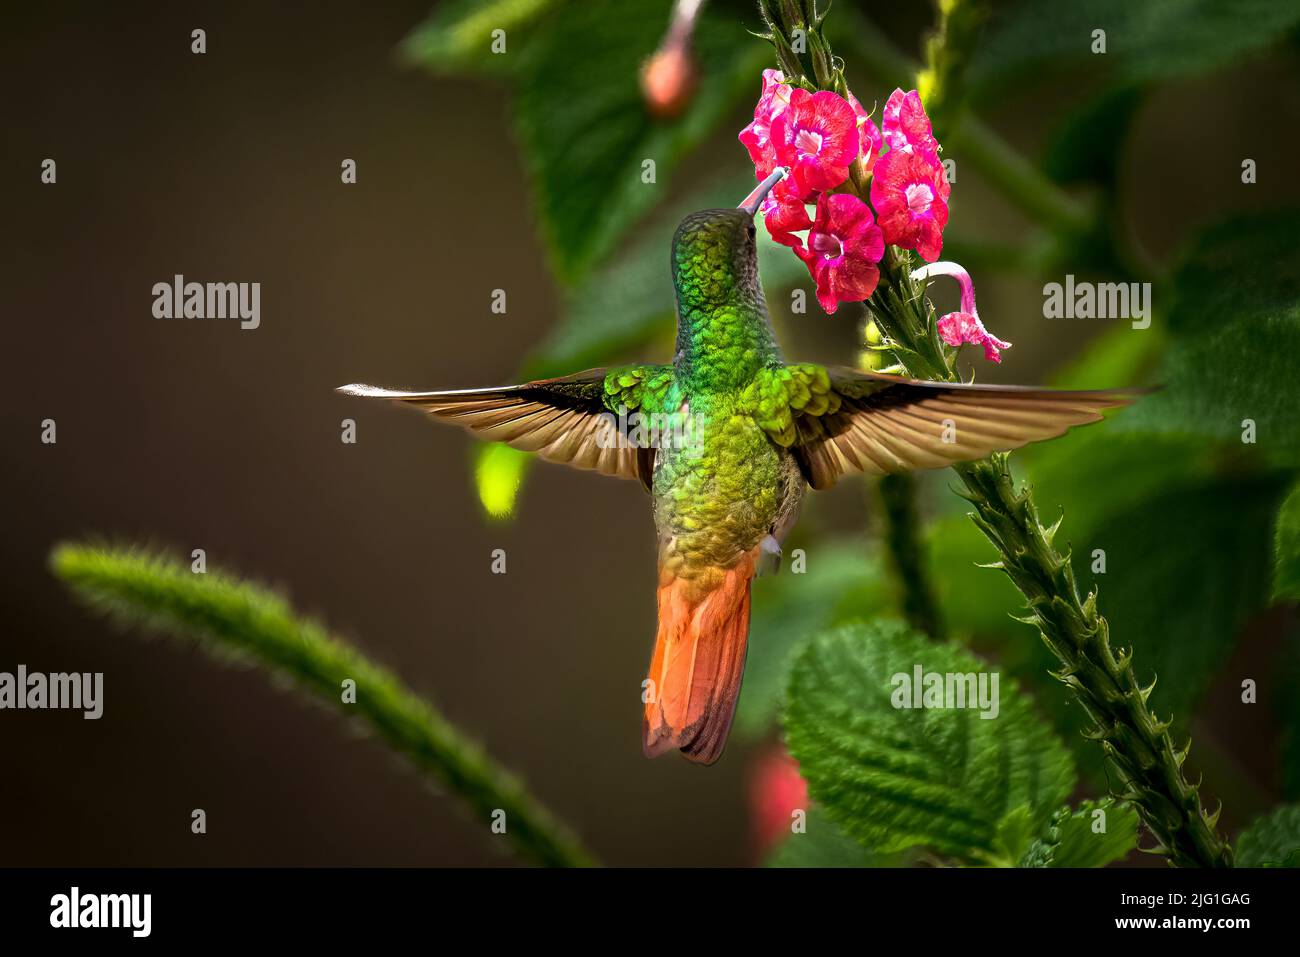 Rufous tailed hummingbird in flight feeding on a red flower with green background Stock Photo